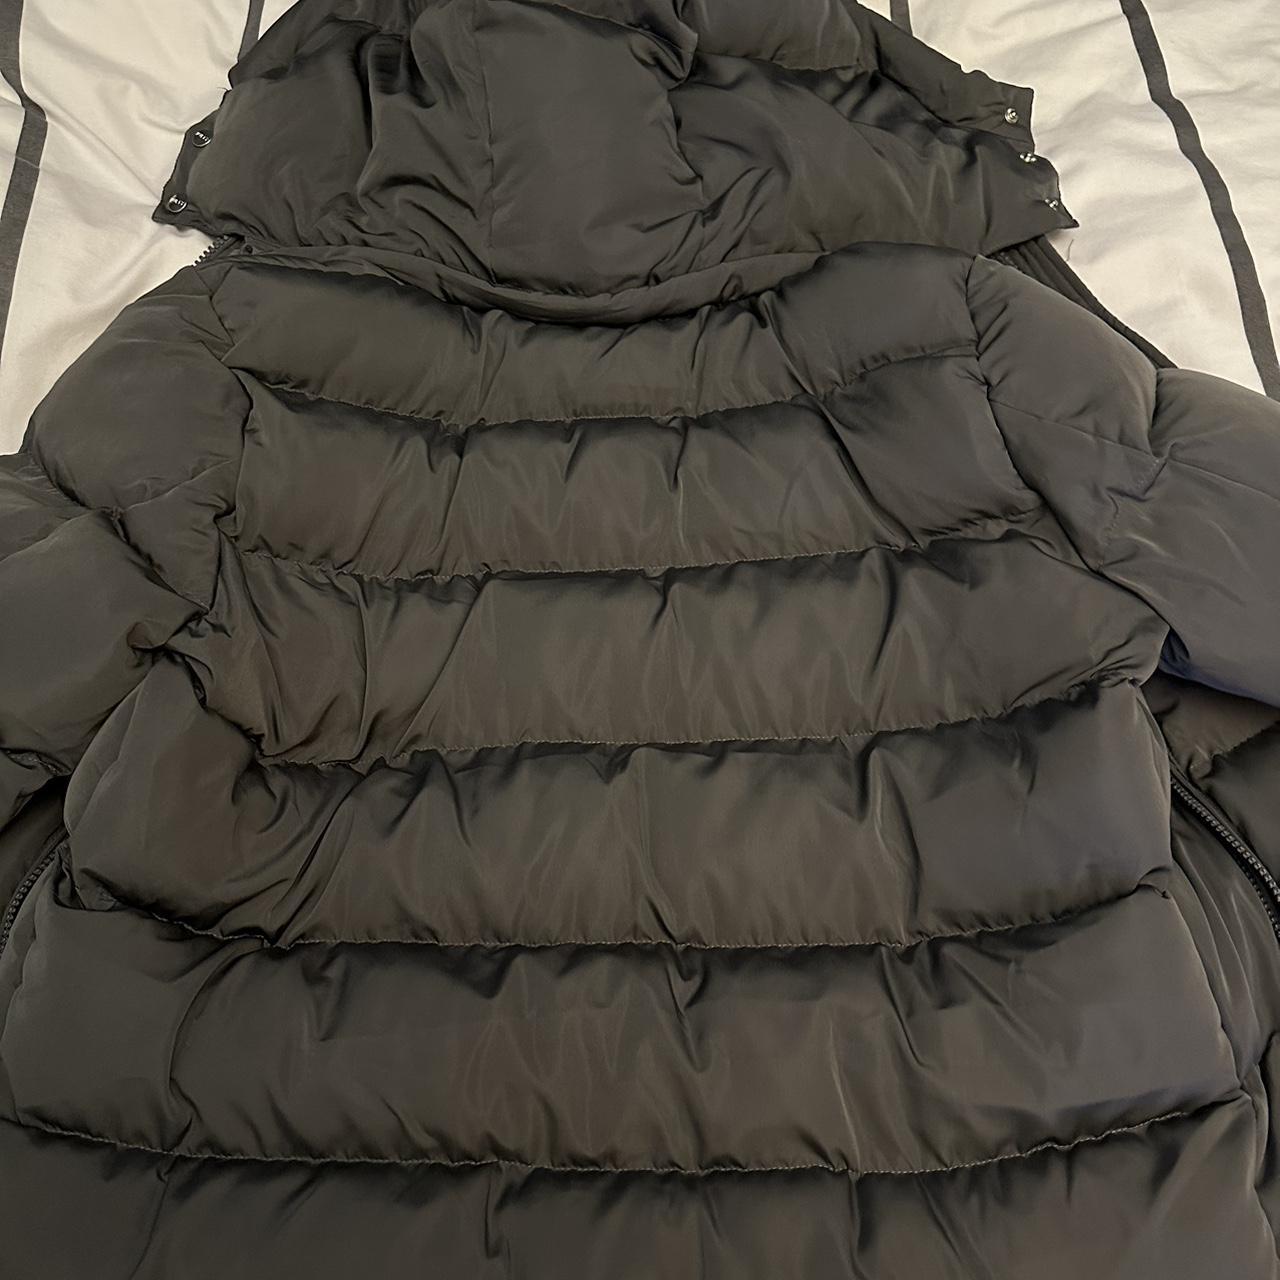 NVLTY Grey Puffer Jacket RRP £130 Size S Only worn... - Depop